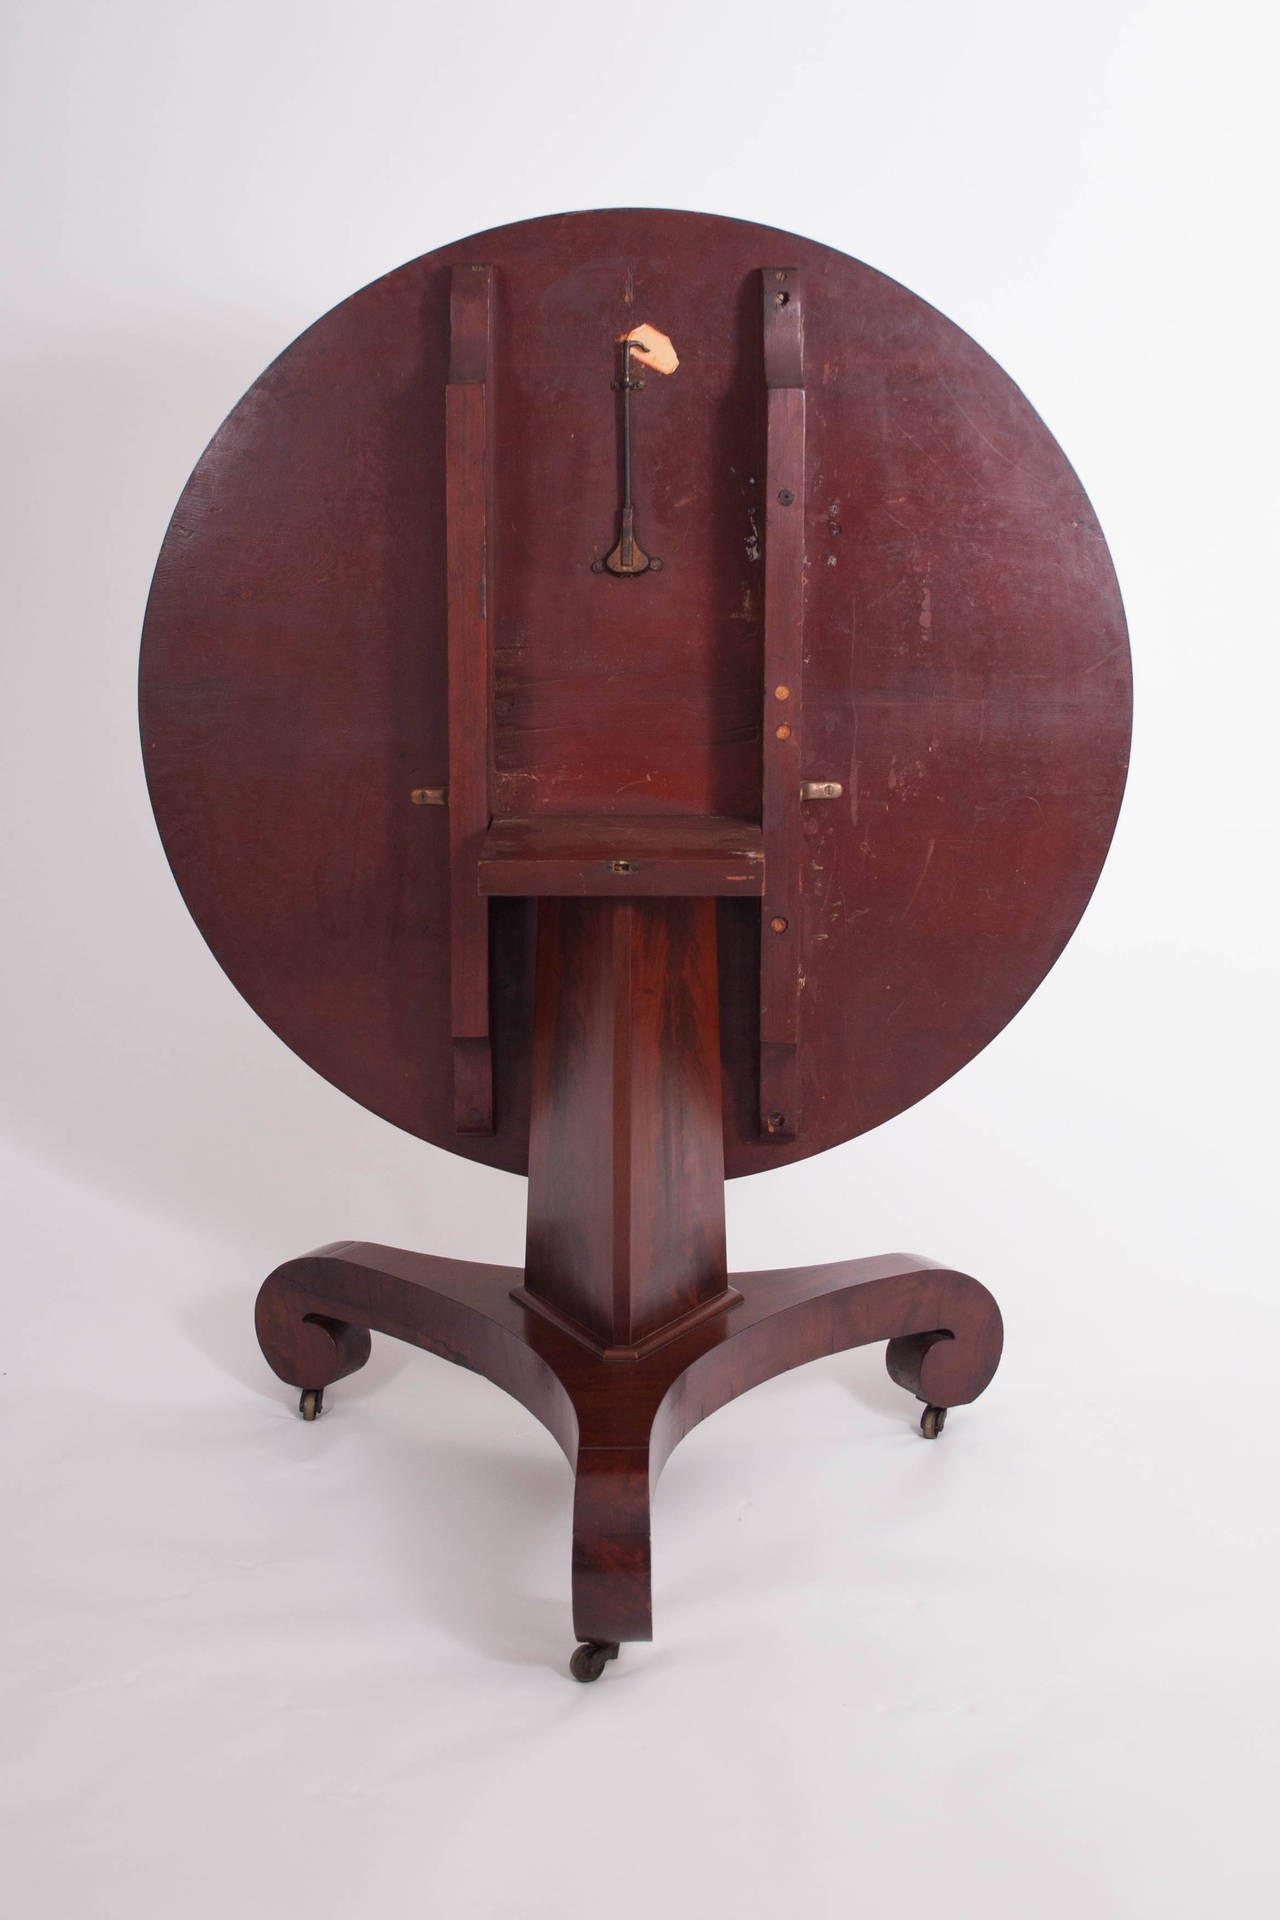 American, circa 1830-1835.

The circular top with pie-slice-shaped flitches for flame mahogany radiating from a central point above a tapering three-sided pedestal faced with flame mahogany veneers on a tripartite base with scrolled feet on